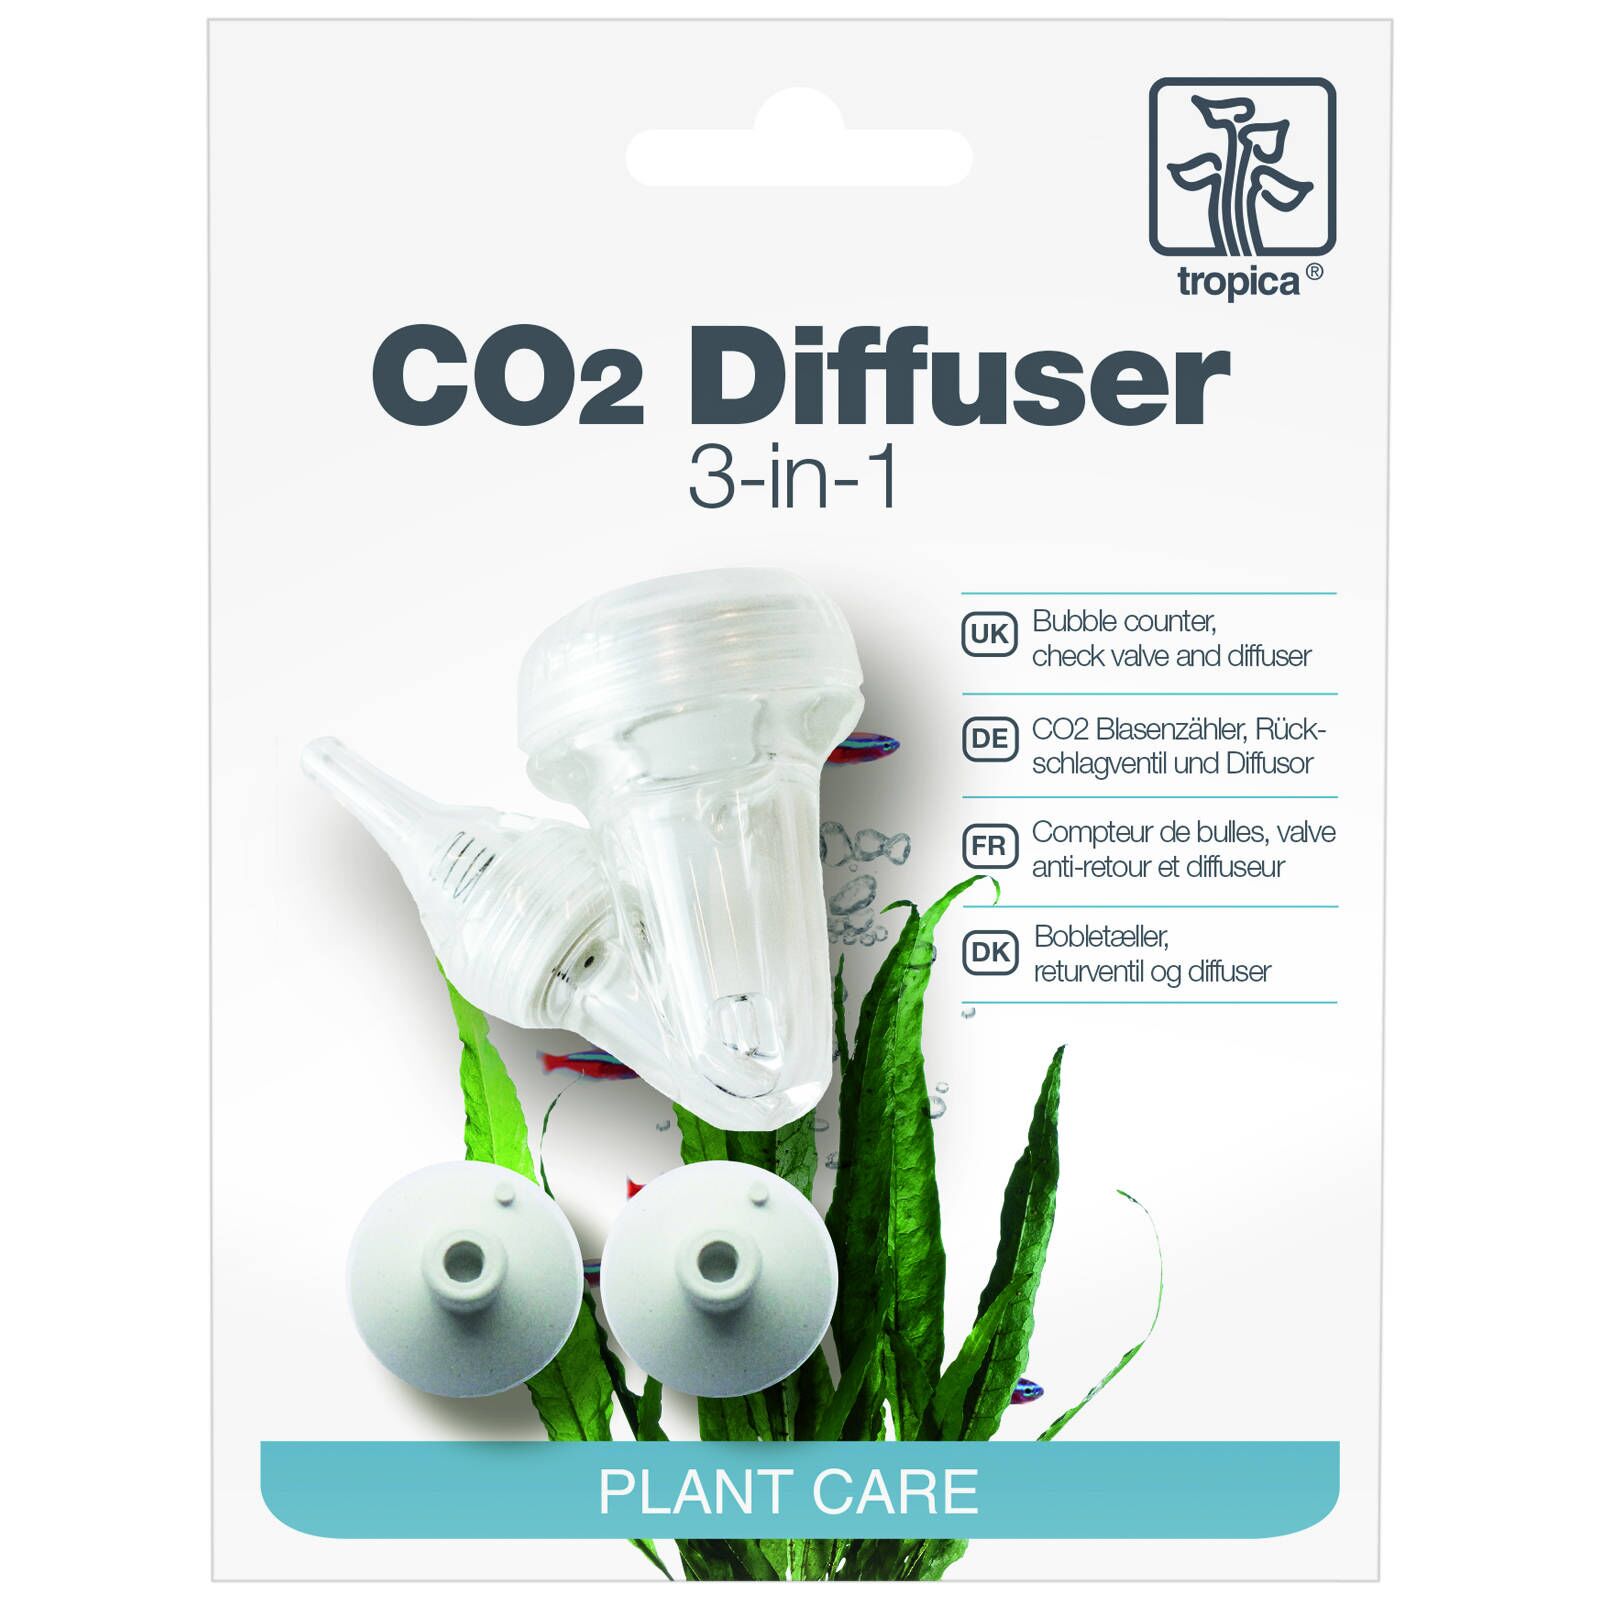 Can my CO2 Diffusor be placed like this? CO2 Checker is on the